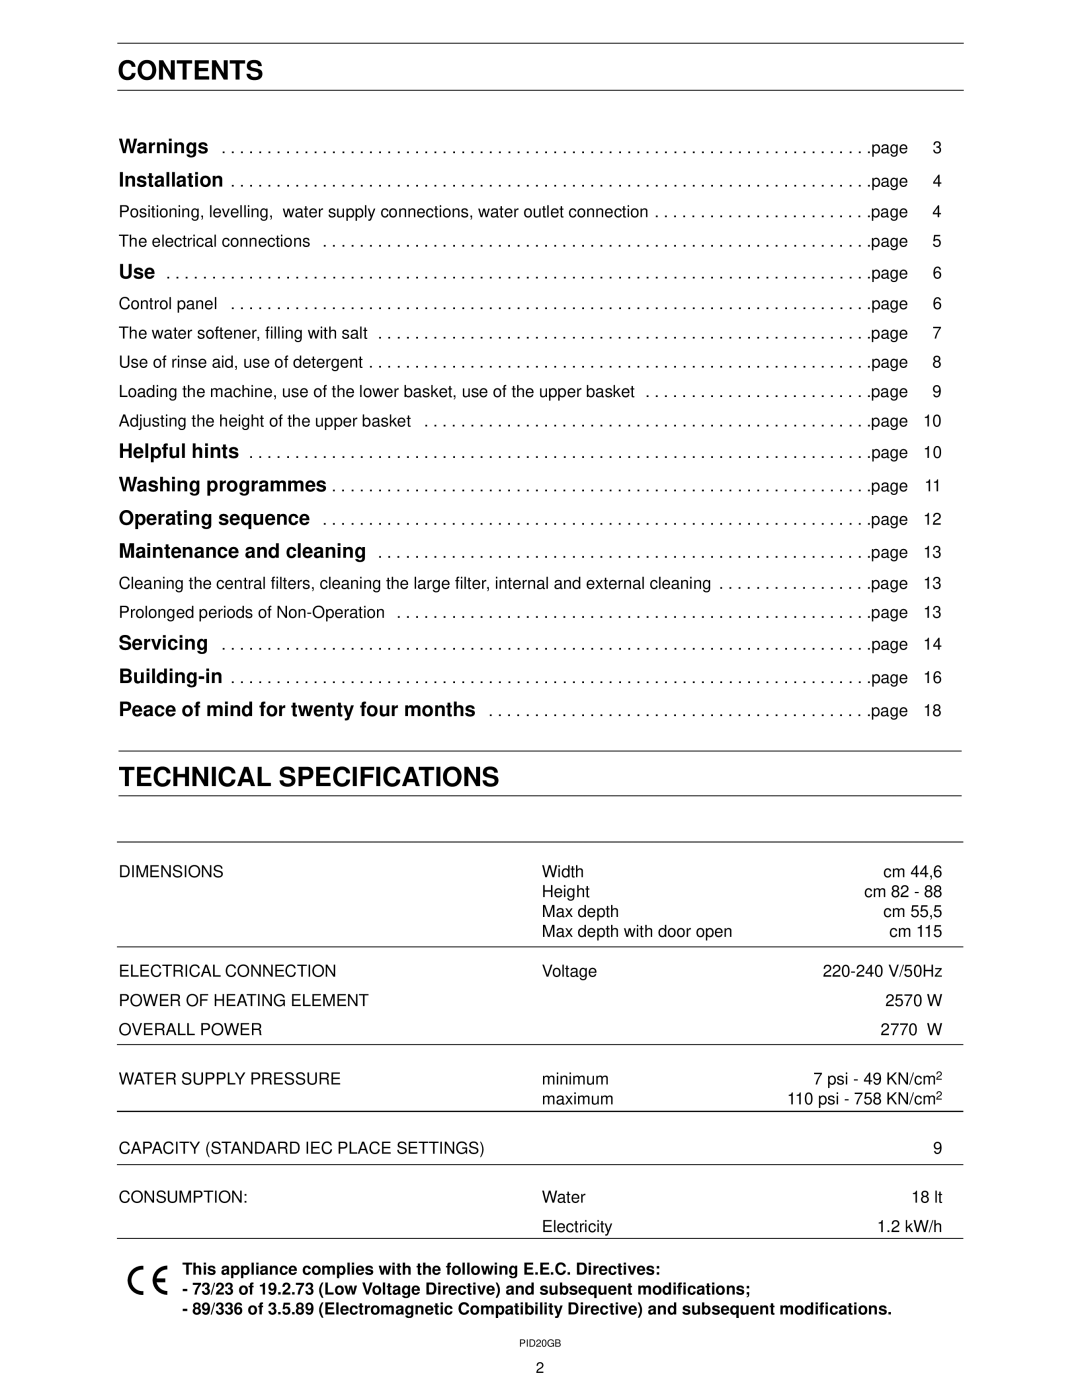 Zanussi ZT 415 manual Contents, Technical Specifications 